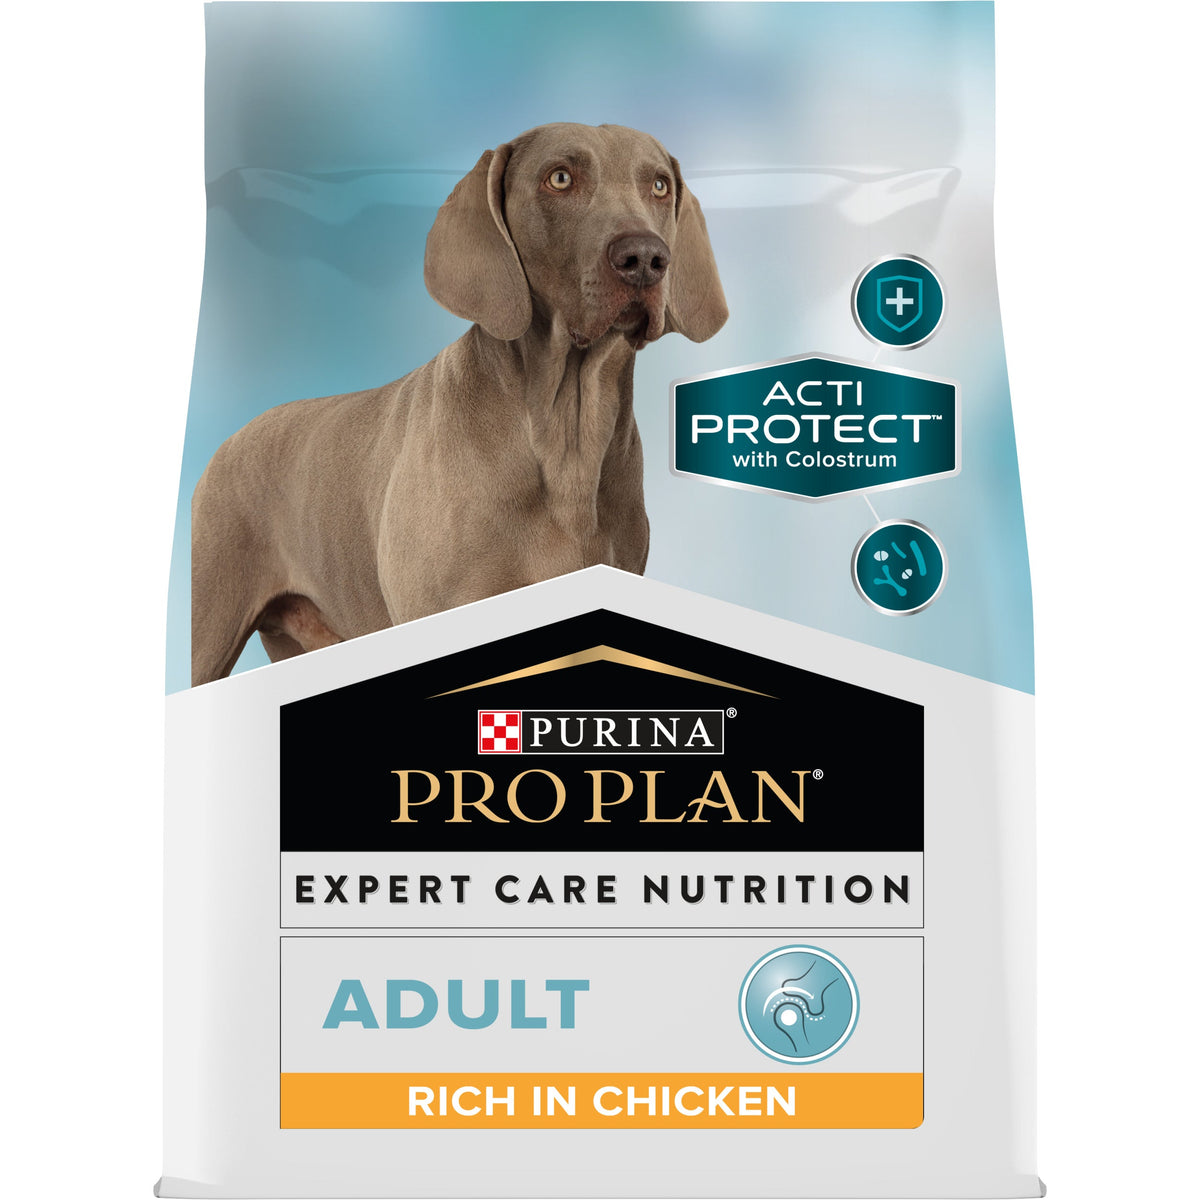 PURINA® PRO PLAN® Expert Care Nutrition - Acti-Protect™ Adult Chicken.